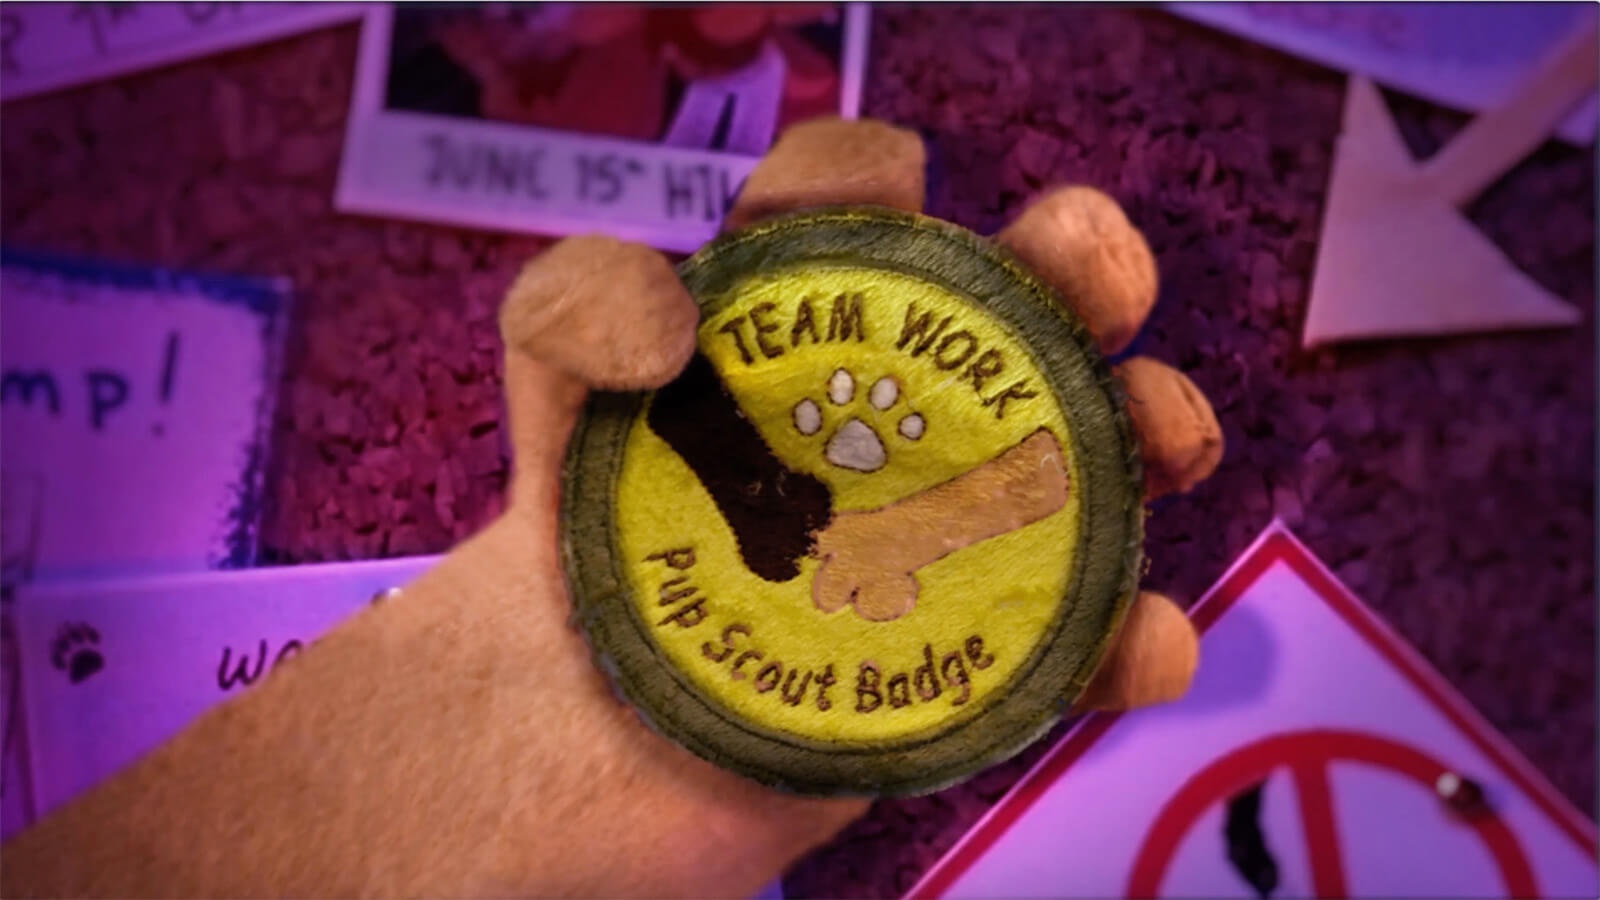 A merit badge from the pup scouts for "Team Work."